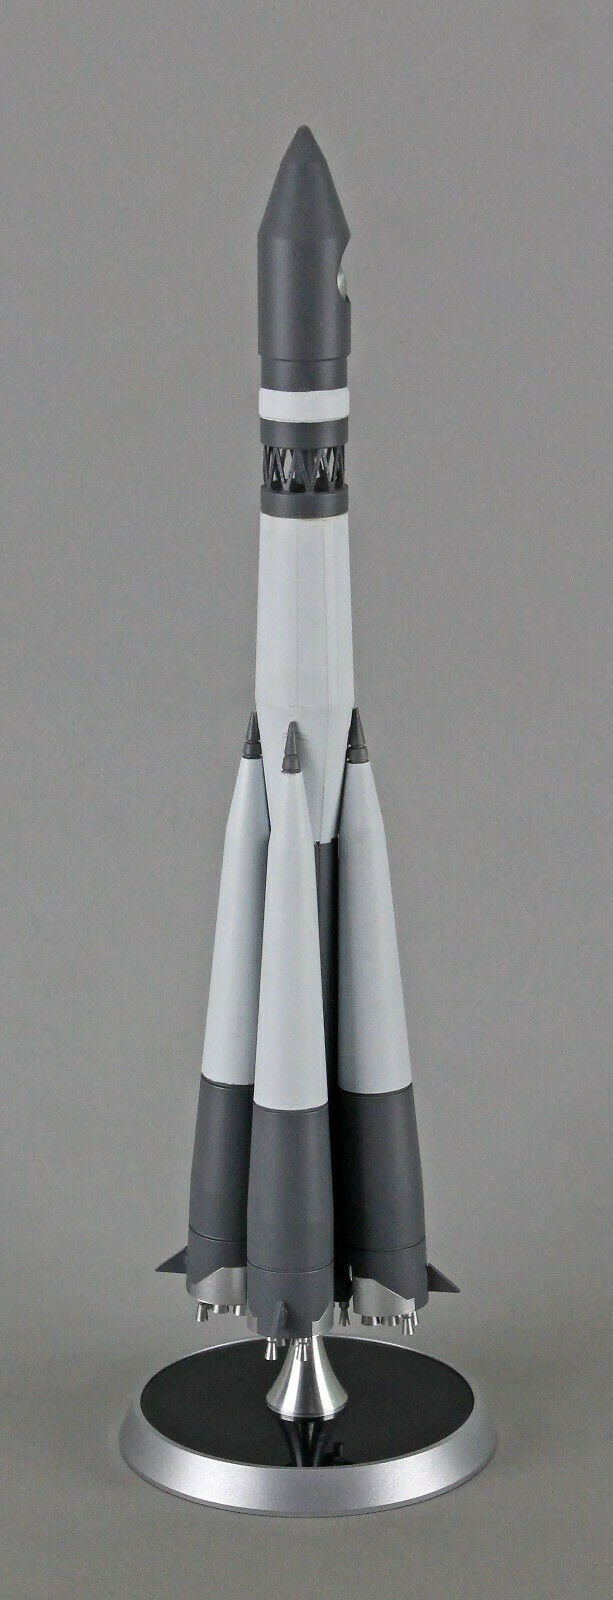 1144 Scale Model of Russian Rocket Vostok Made of Metal image